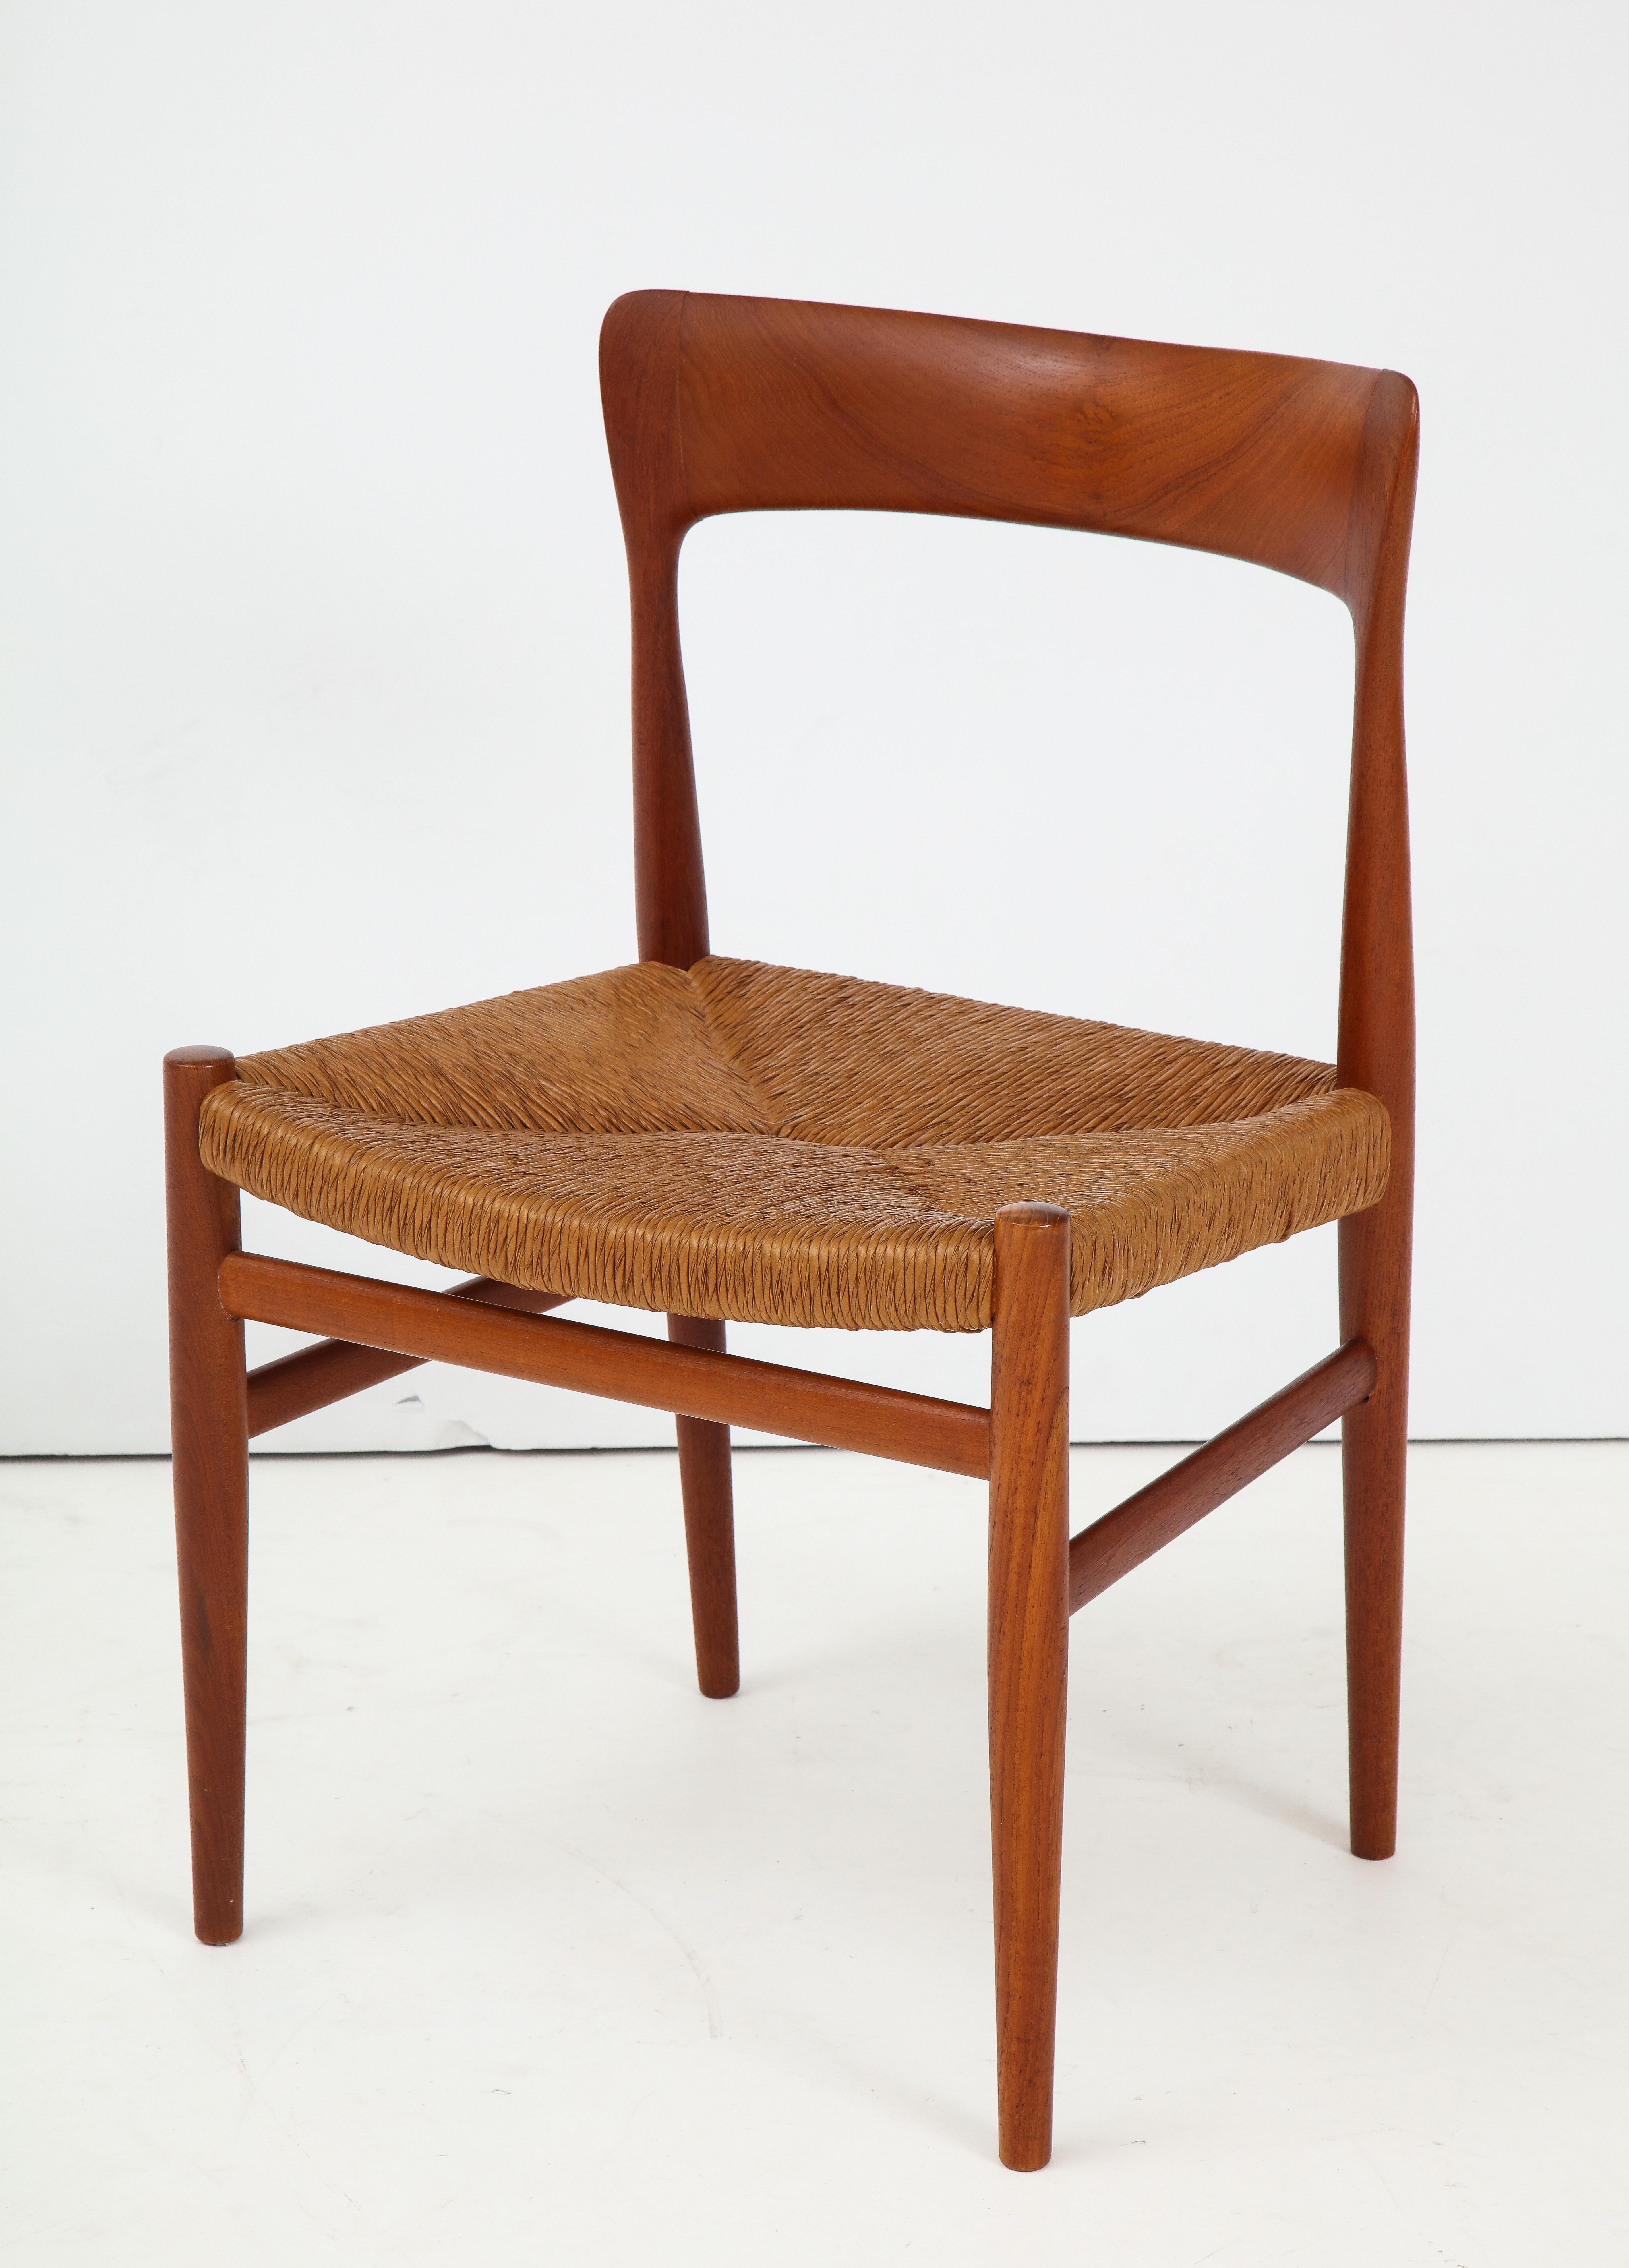 Papercord 1950s Danish Teak Modernist Dining Chairs with Paper Cord Seats